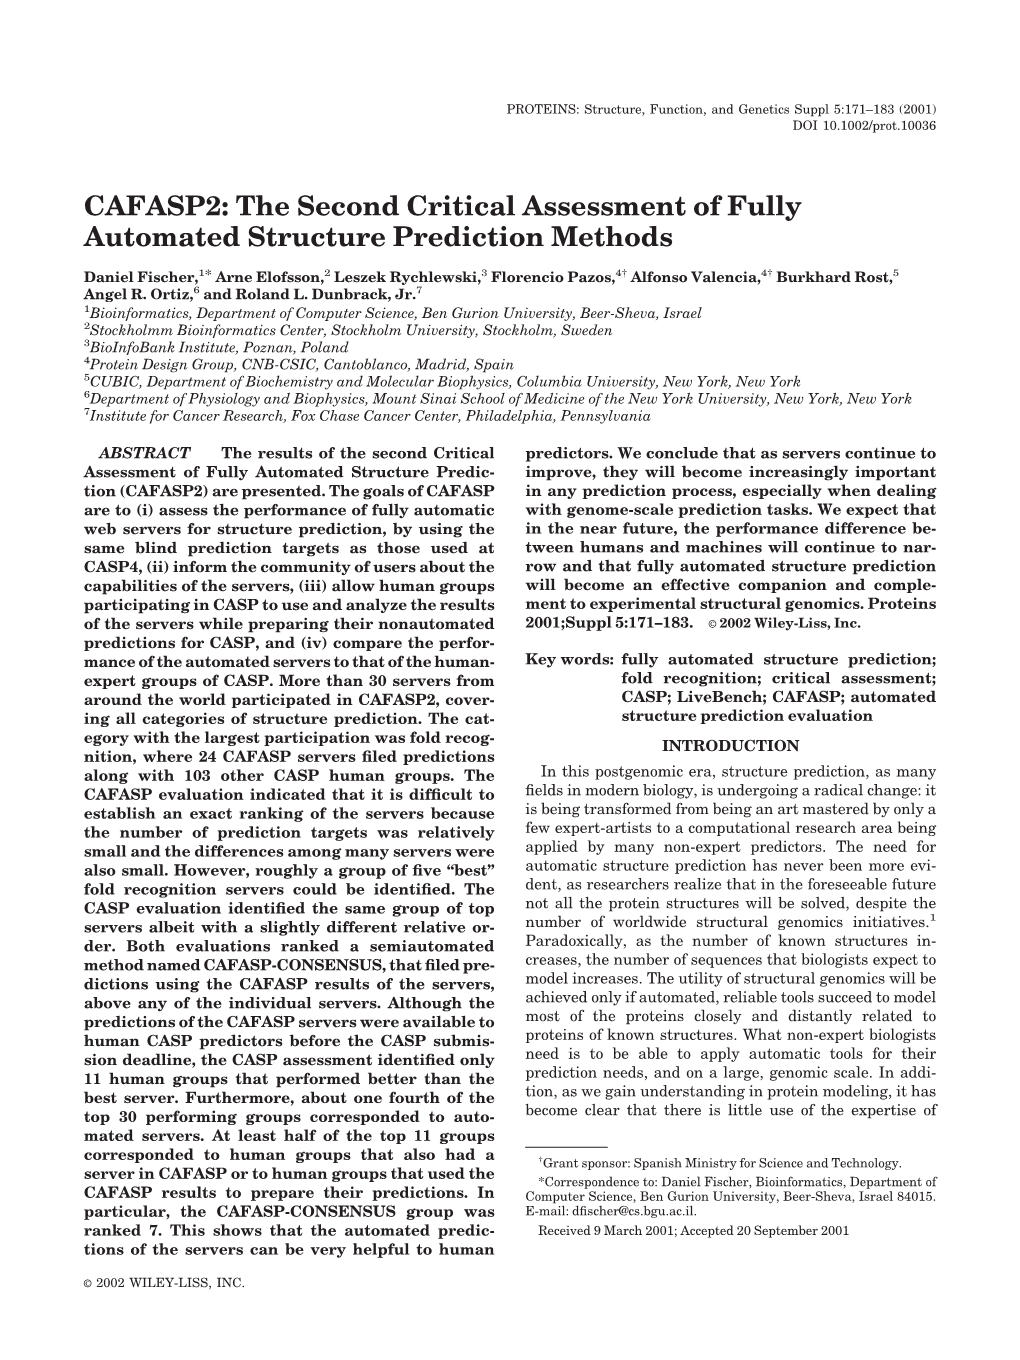 The Second Critical Assessment of Fully Automated Structure